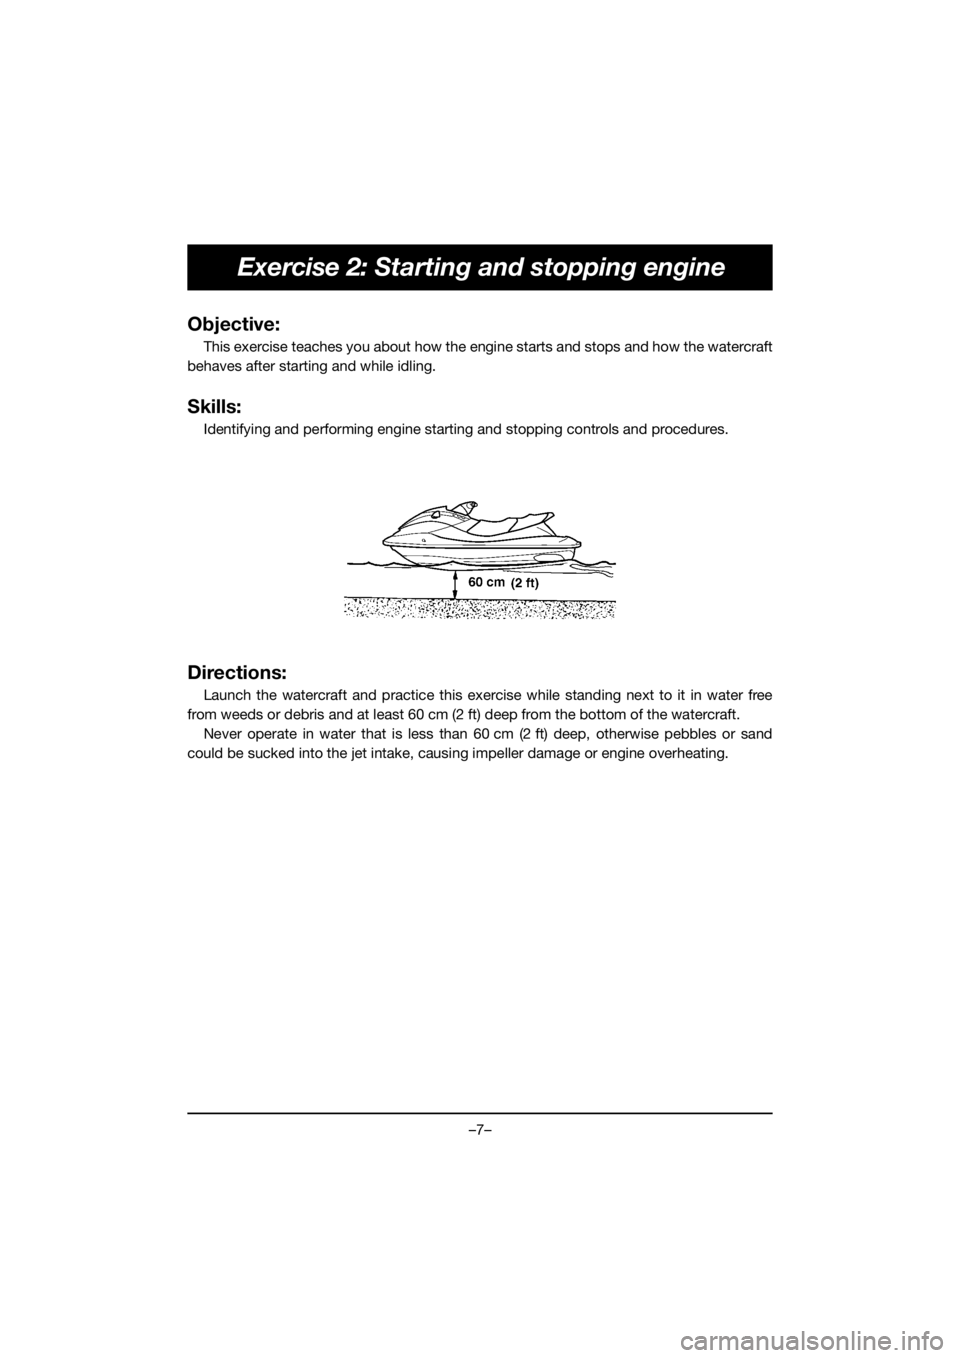 YAMAHA EXR 2020  Owners Manual –7–
Exercise 2: Starting and stopping engine
Objective:
This exercise teaches you about how the engine starts and stops and how the watercraft
behaves after starting and while idling.
Skills:
Iden